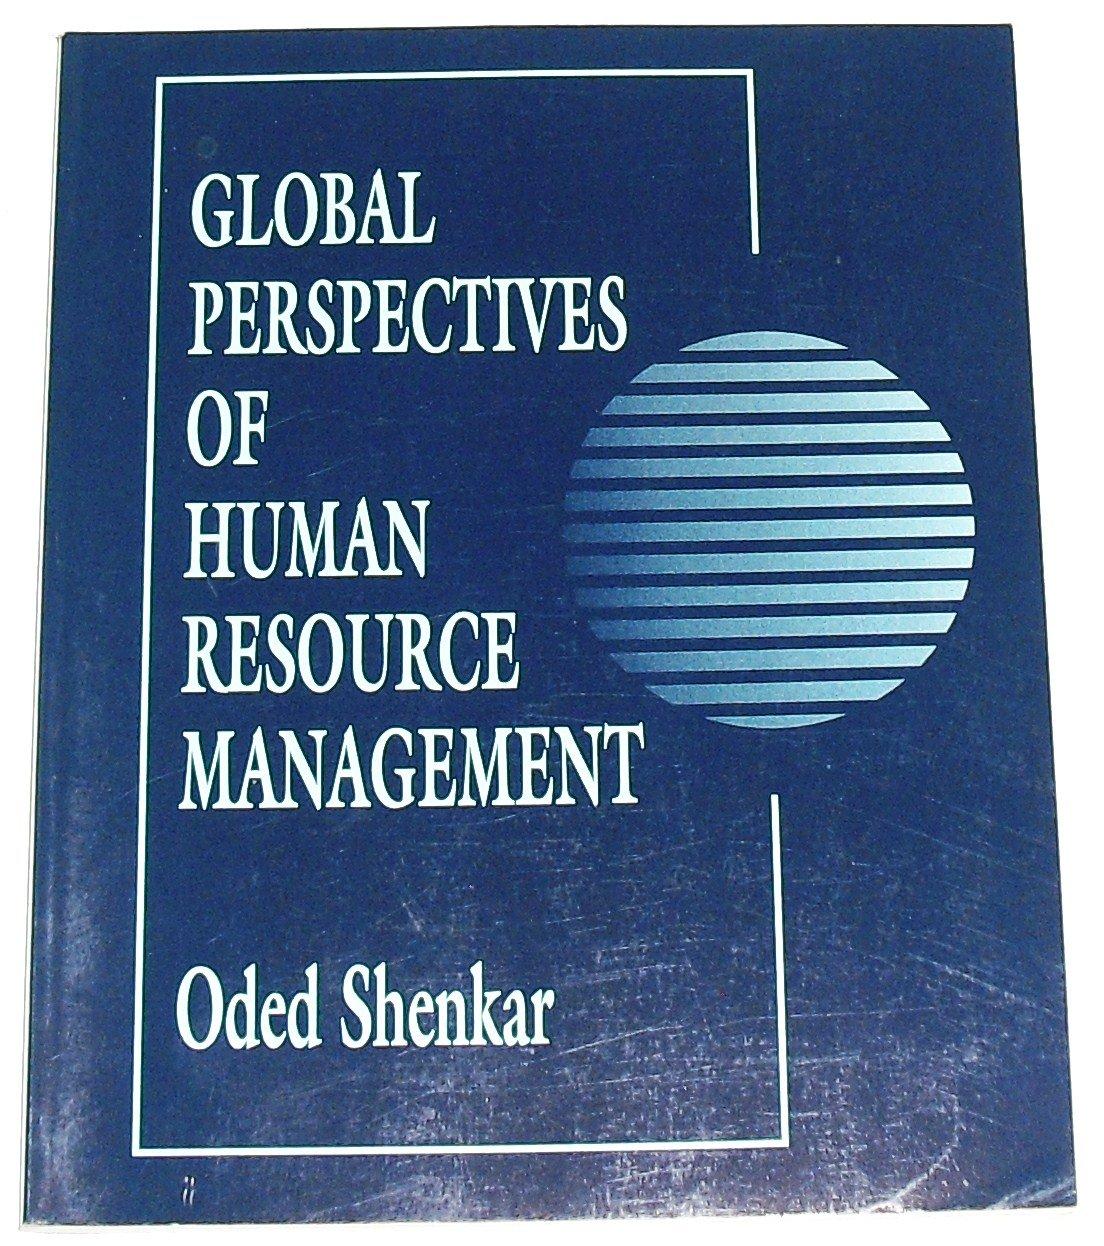 global perspectives of human resource management collected readings 1st edition oded shenkar 0024096512,